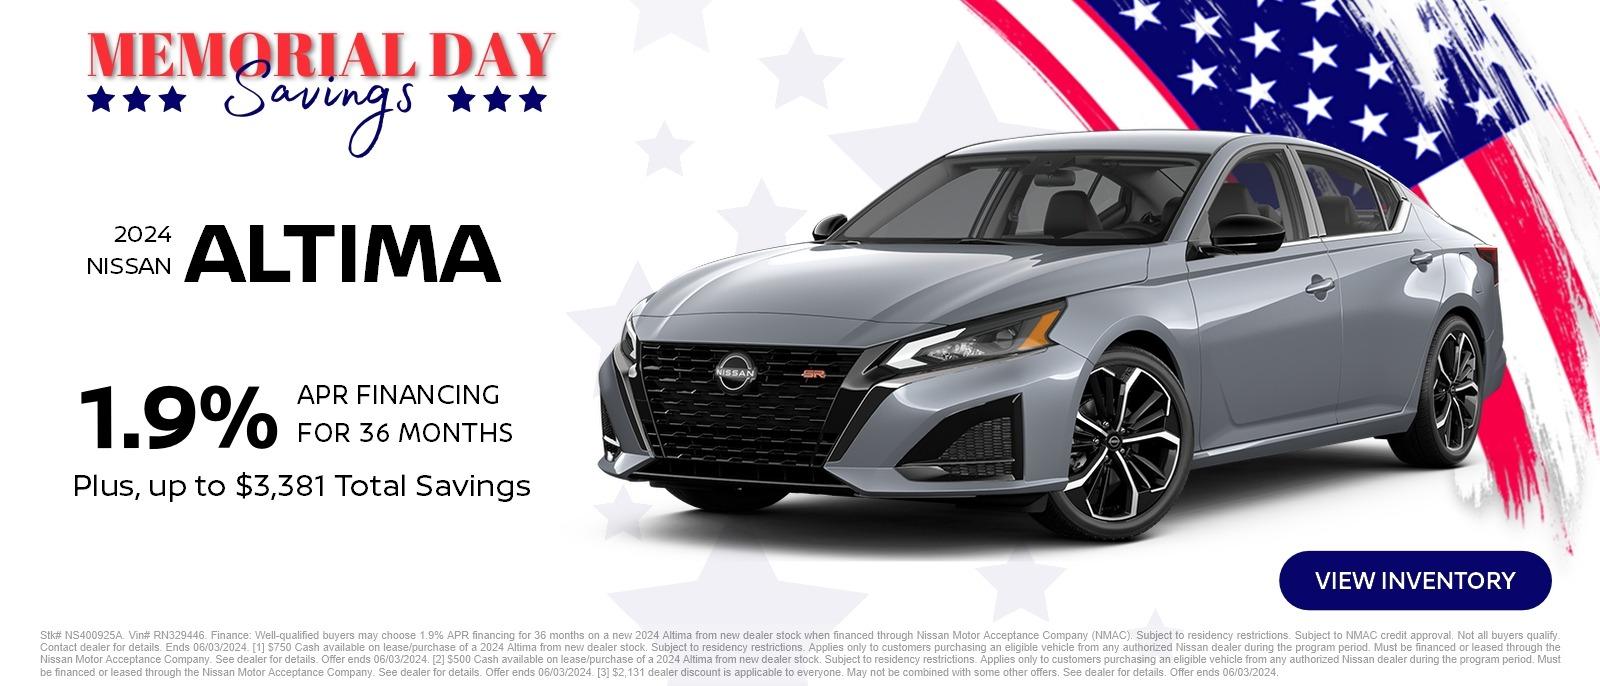 Memorial Day Savings
2024 Nissan Altima
1.9% APR Financing for 36 months
plus, up to $3,381 Total Savings